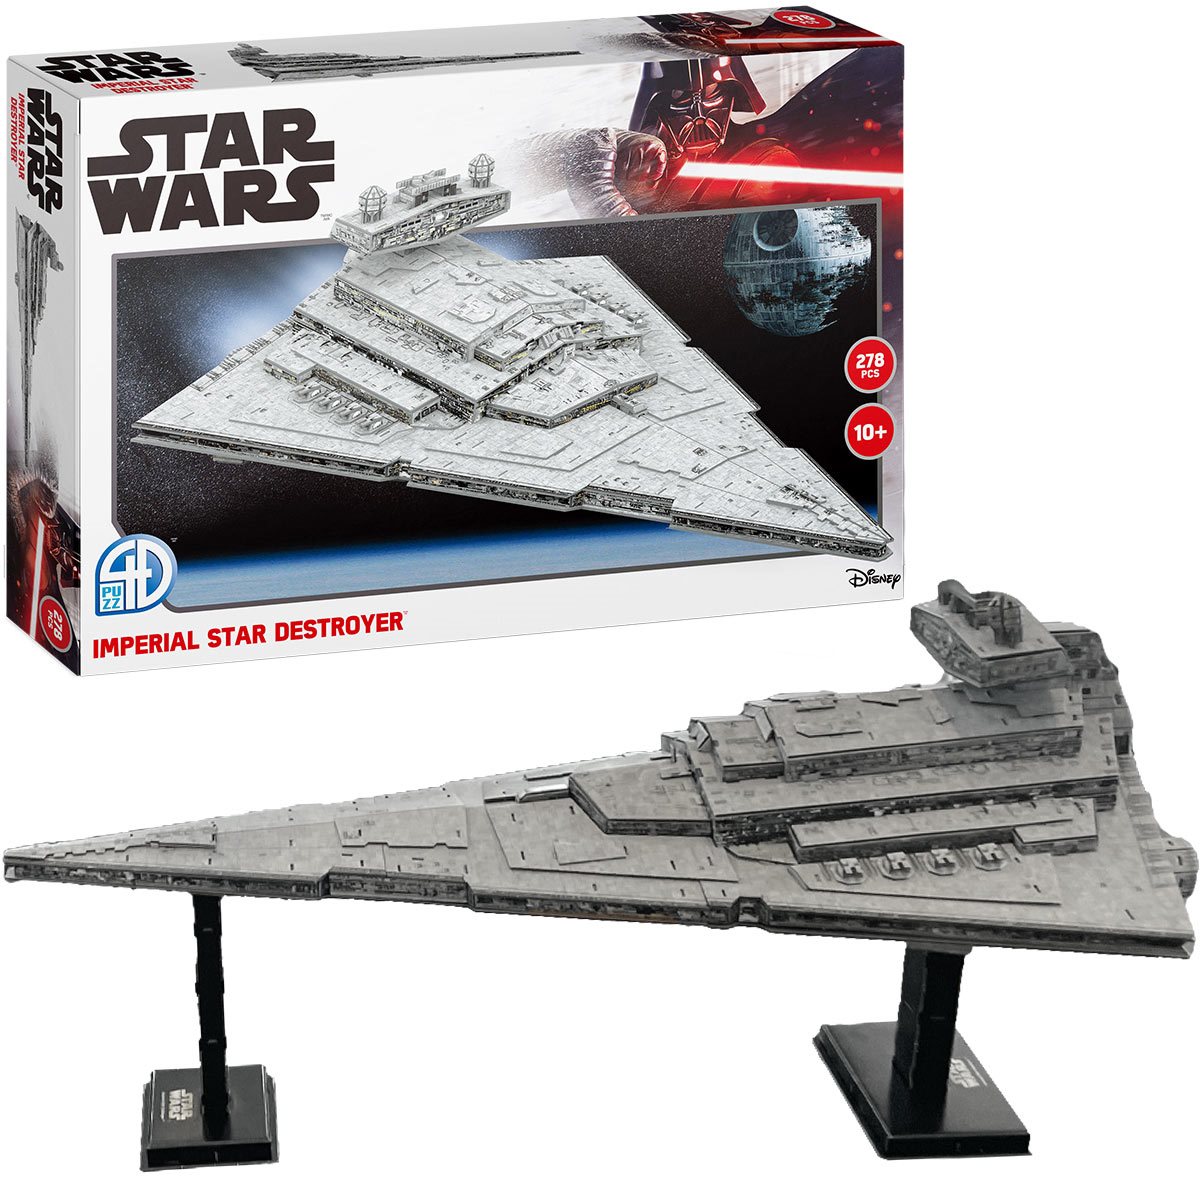 Build your own Star Wars Empire in 3D! Next-level 3D model kits